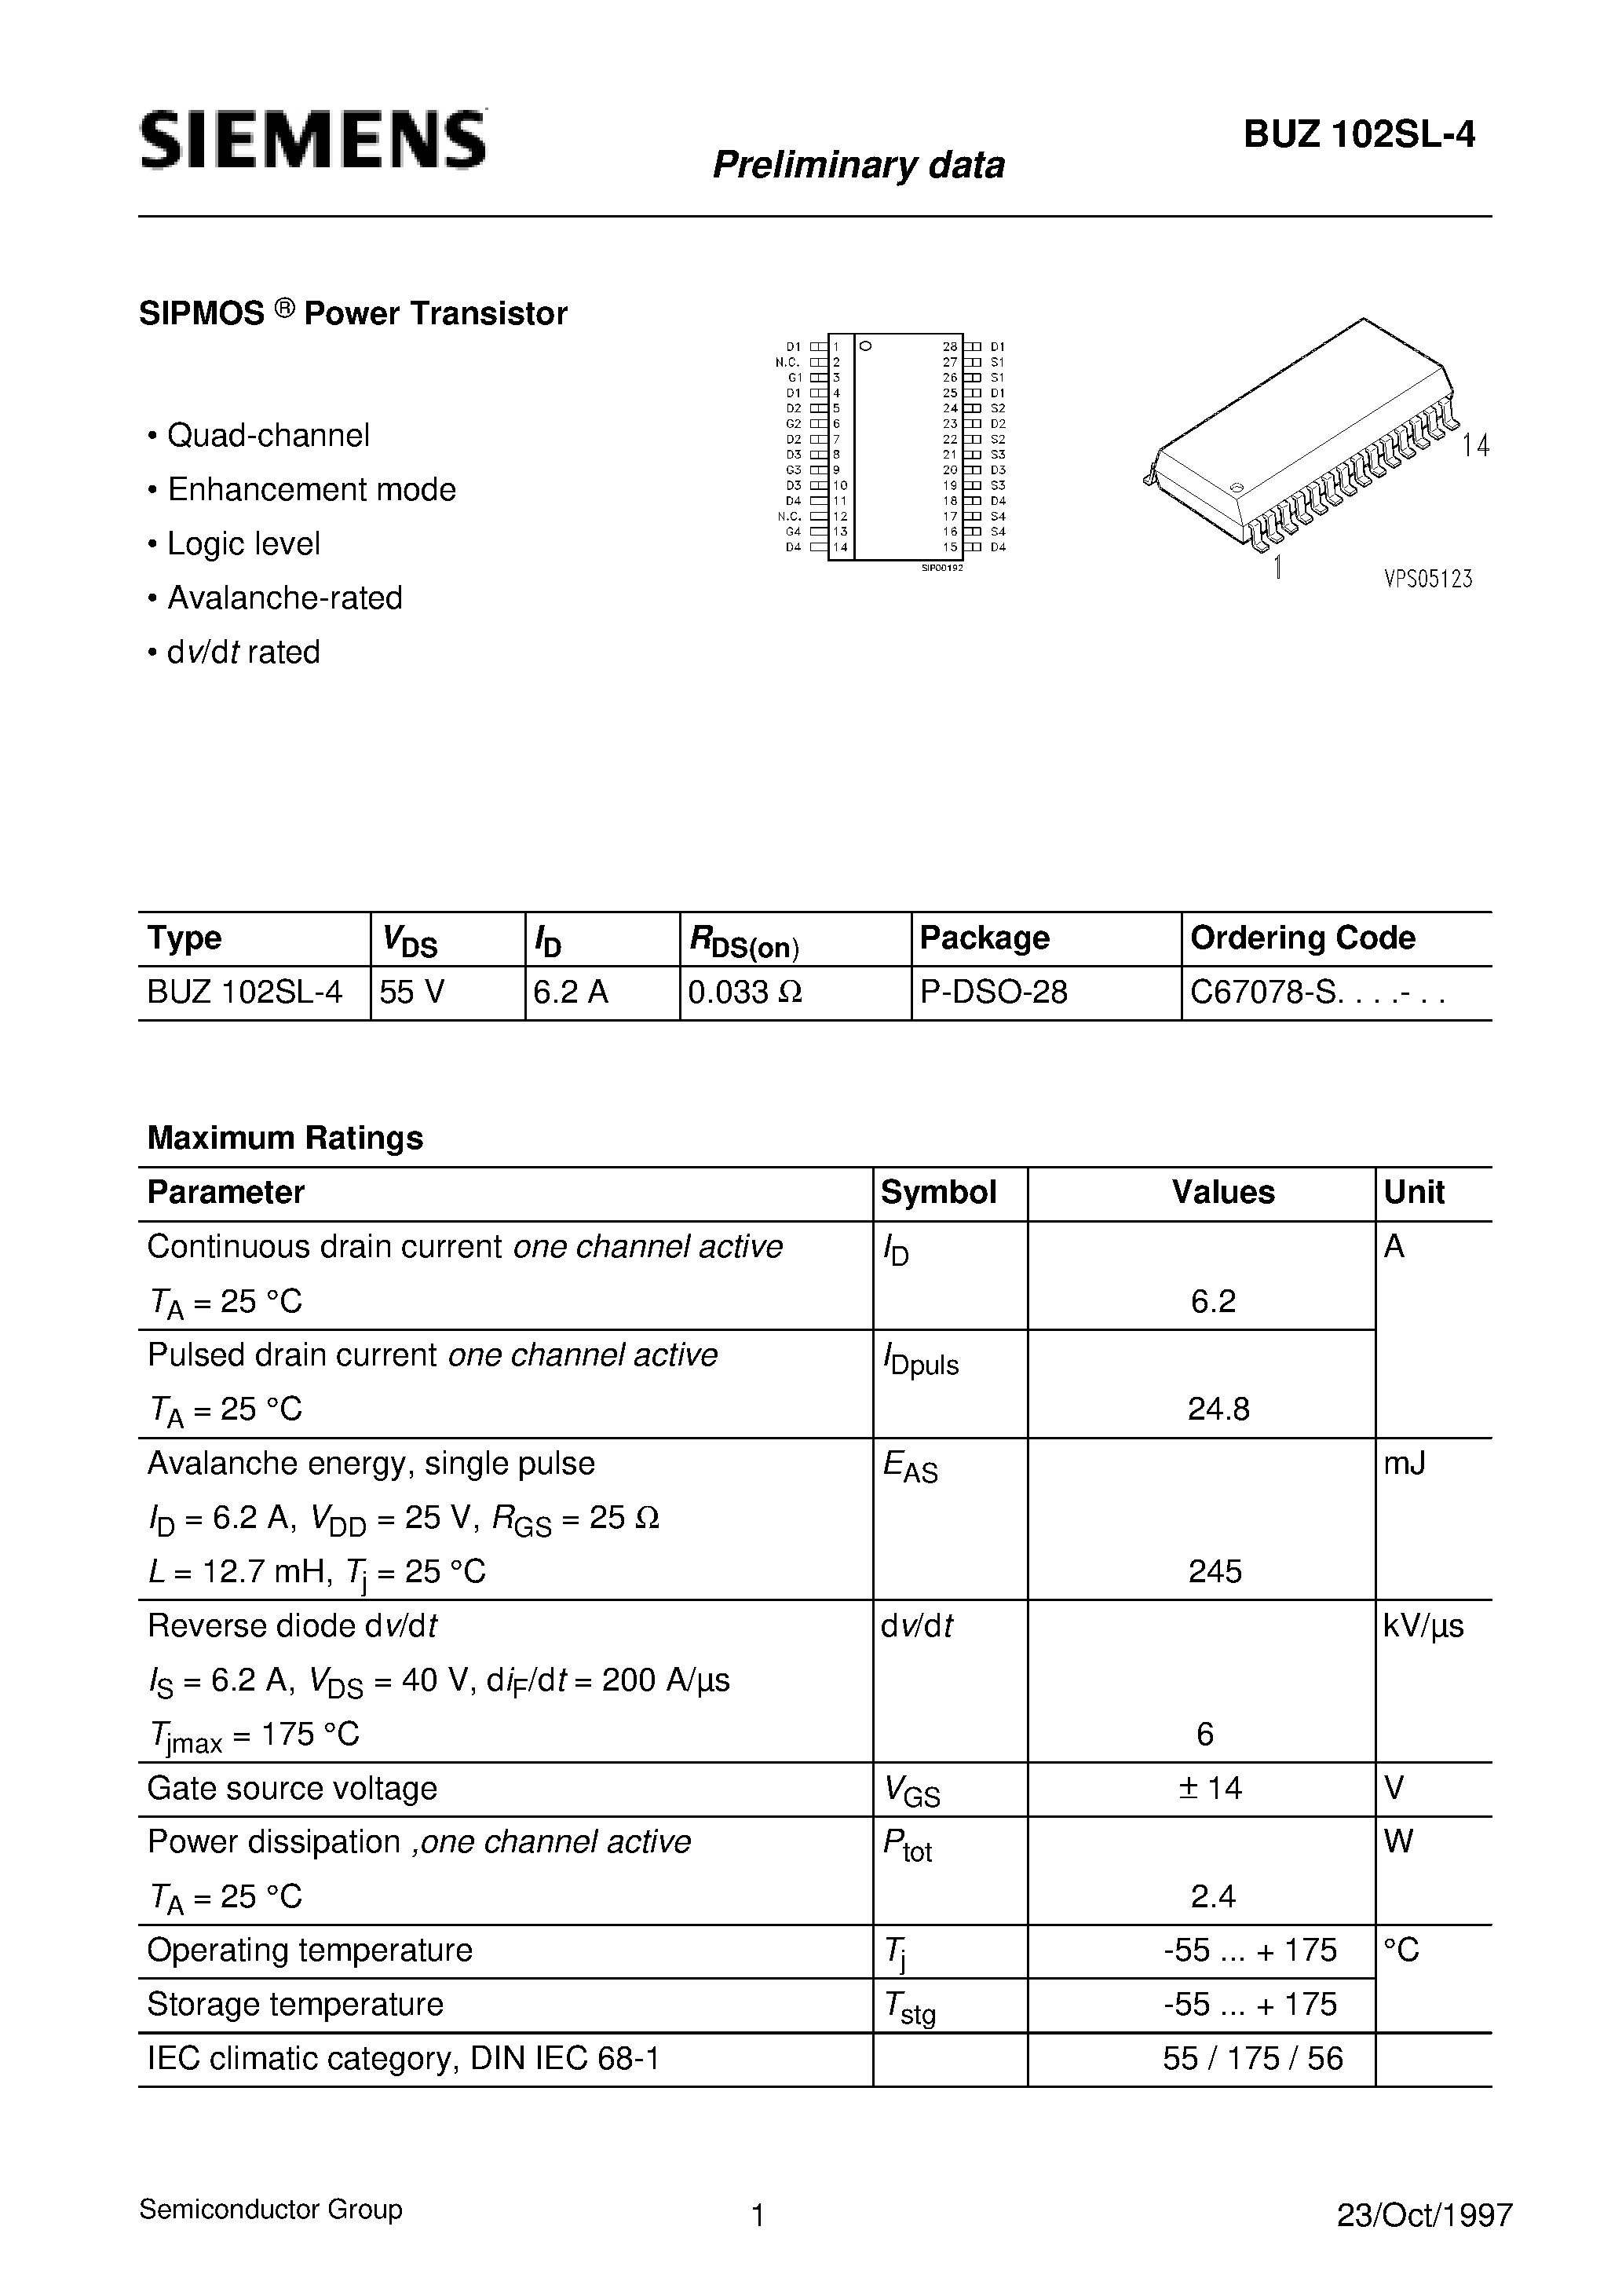 Datasheet BUZ102SL-4 - SIPMOS Power Transistor (Quad-channel Enhancement mode Logic level Avalanche-rated d v/d t rated) page 1